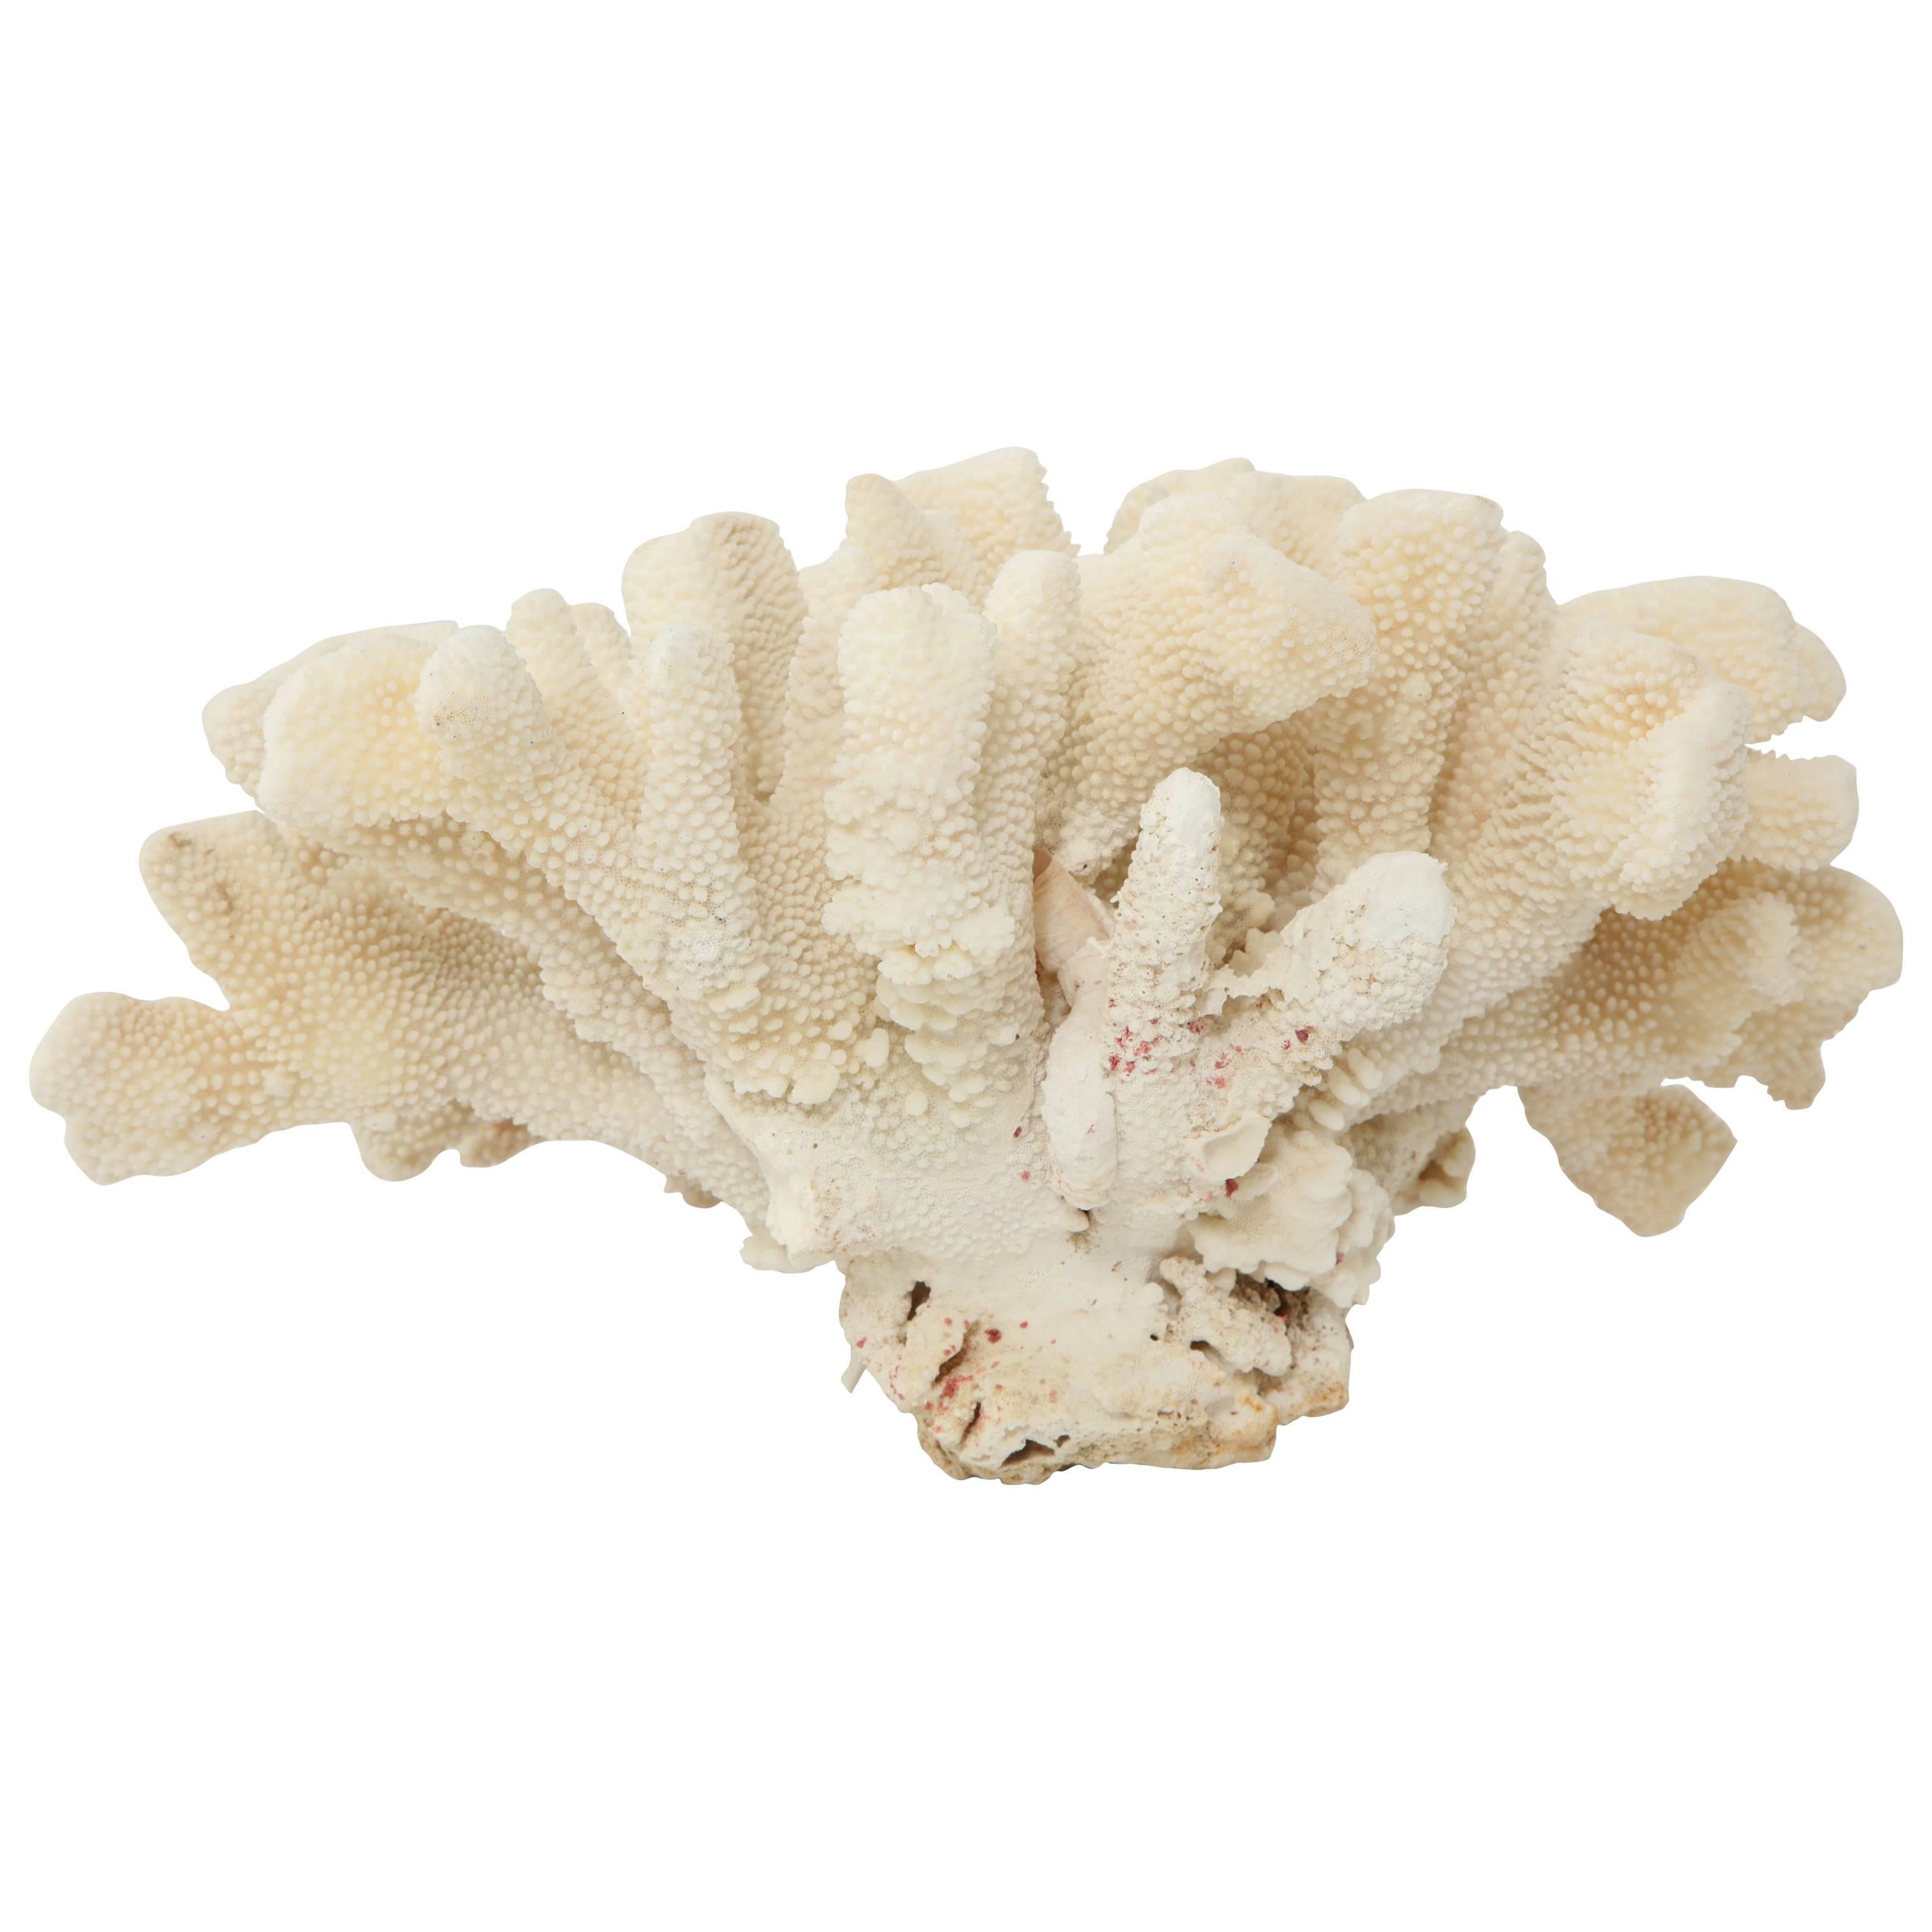 Decorative large coral. Very good condition.